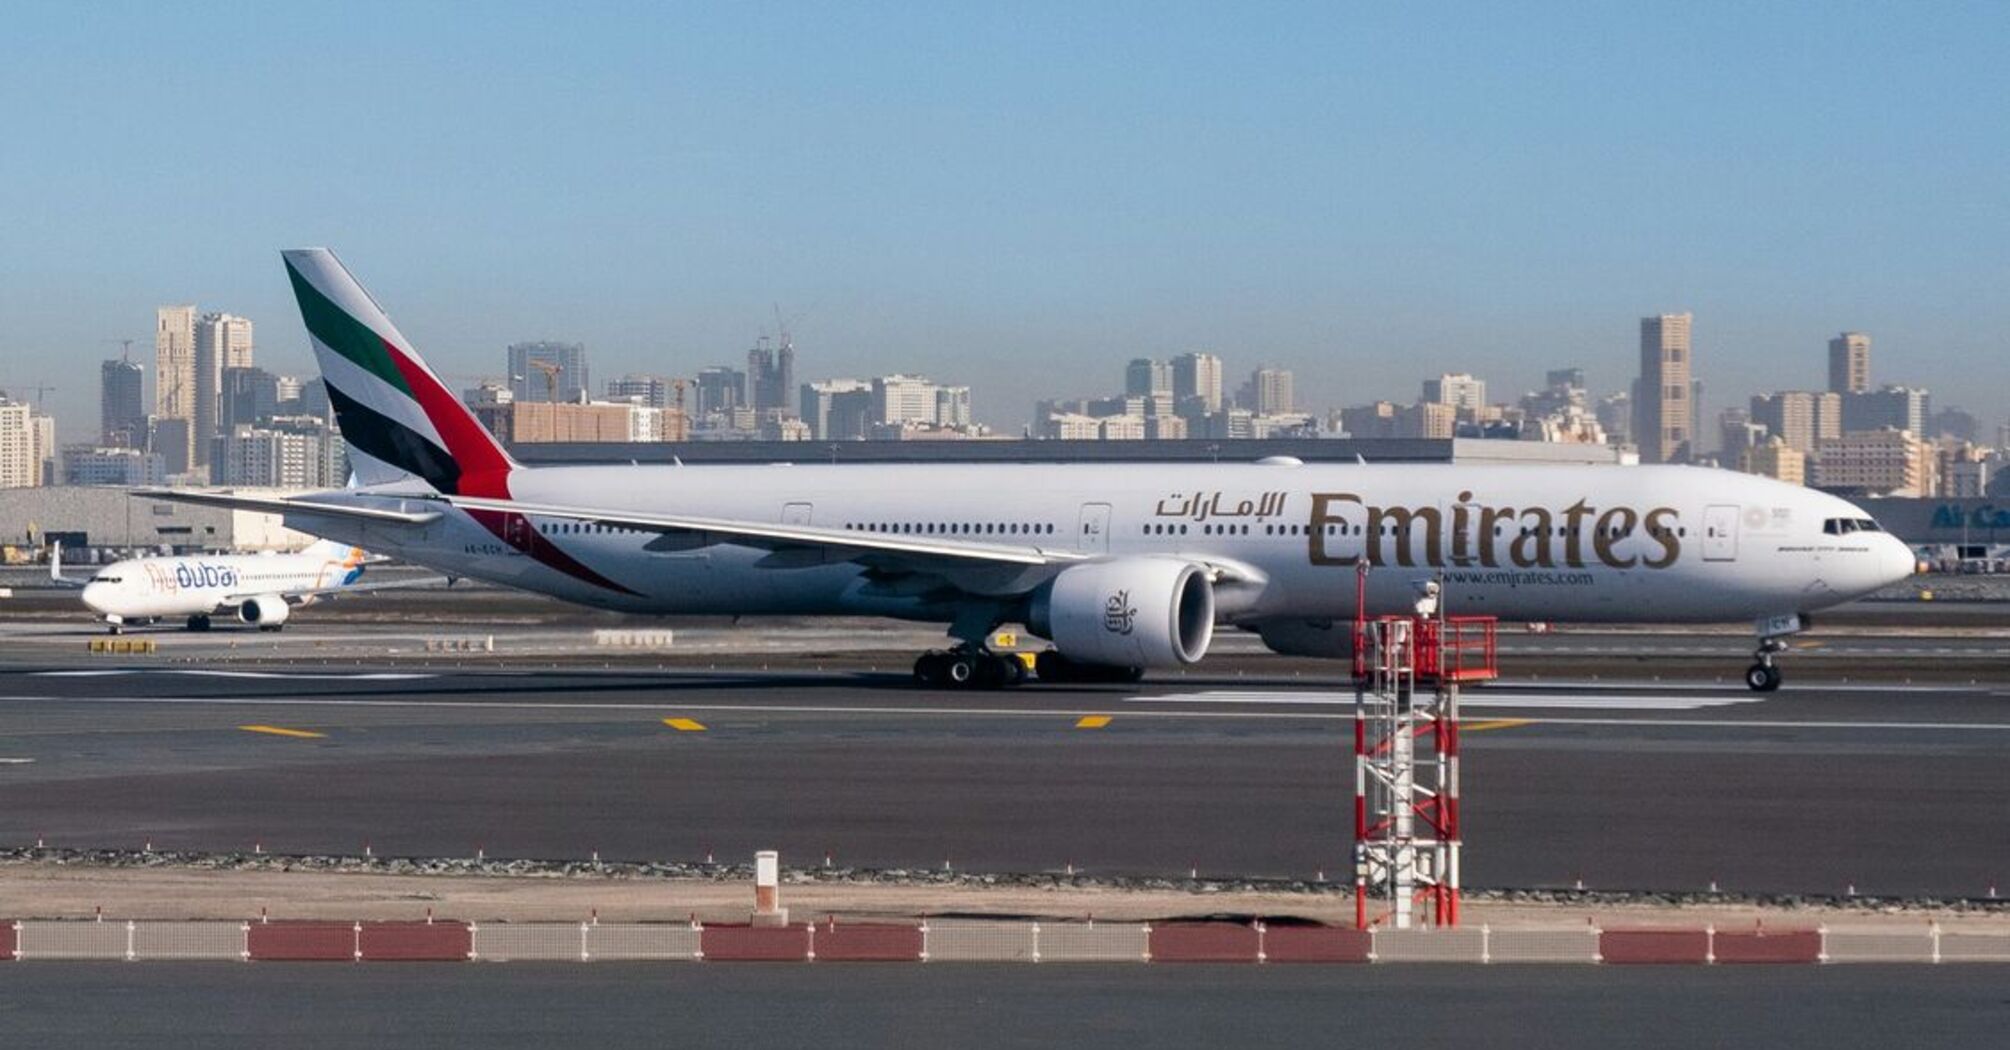 Emirates Airlines plane ready to take off